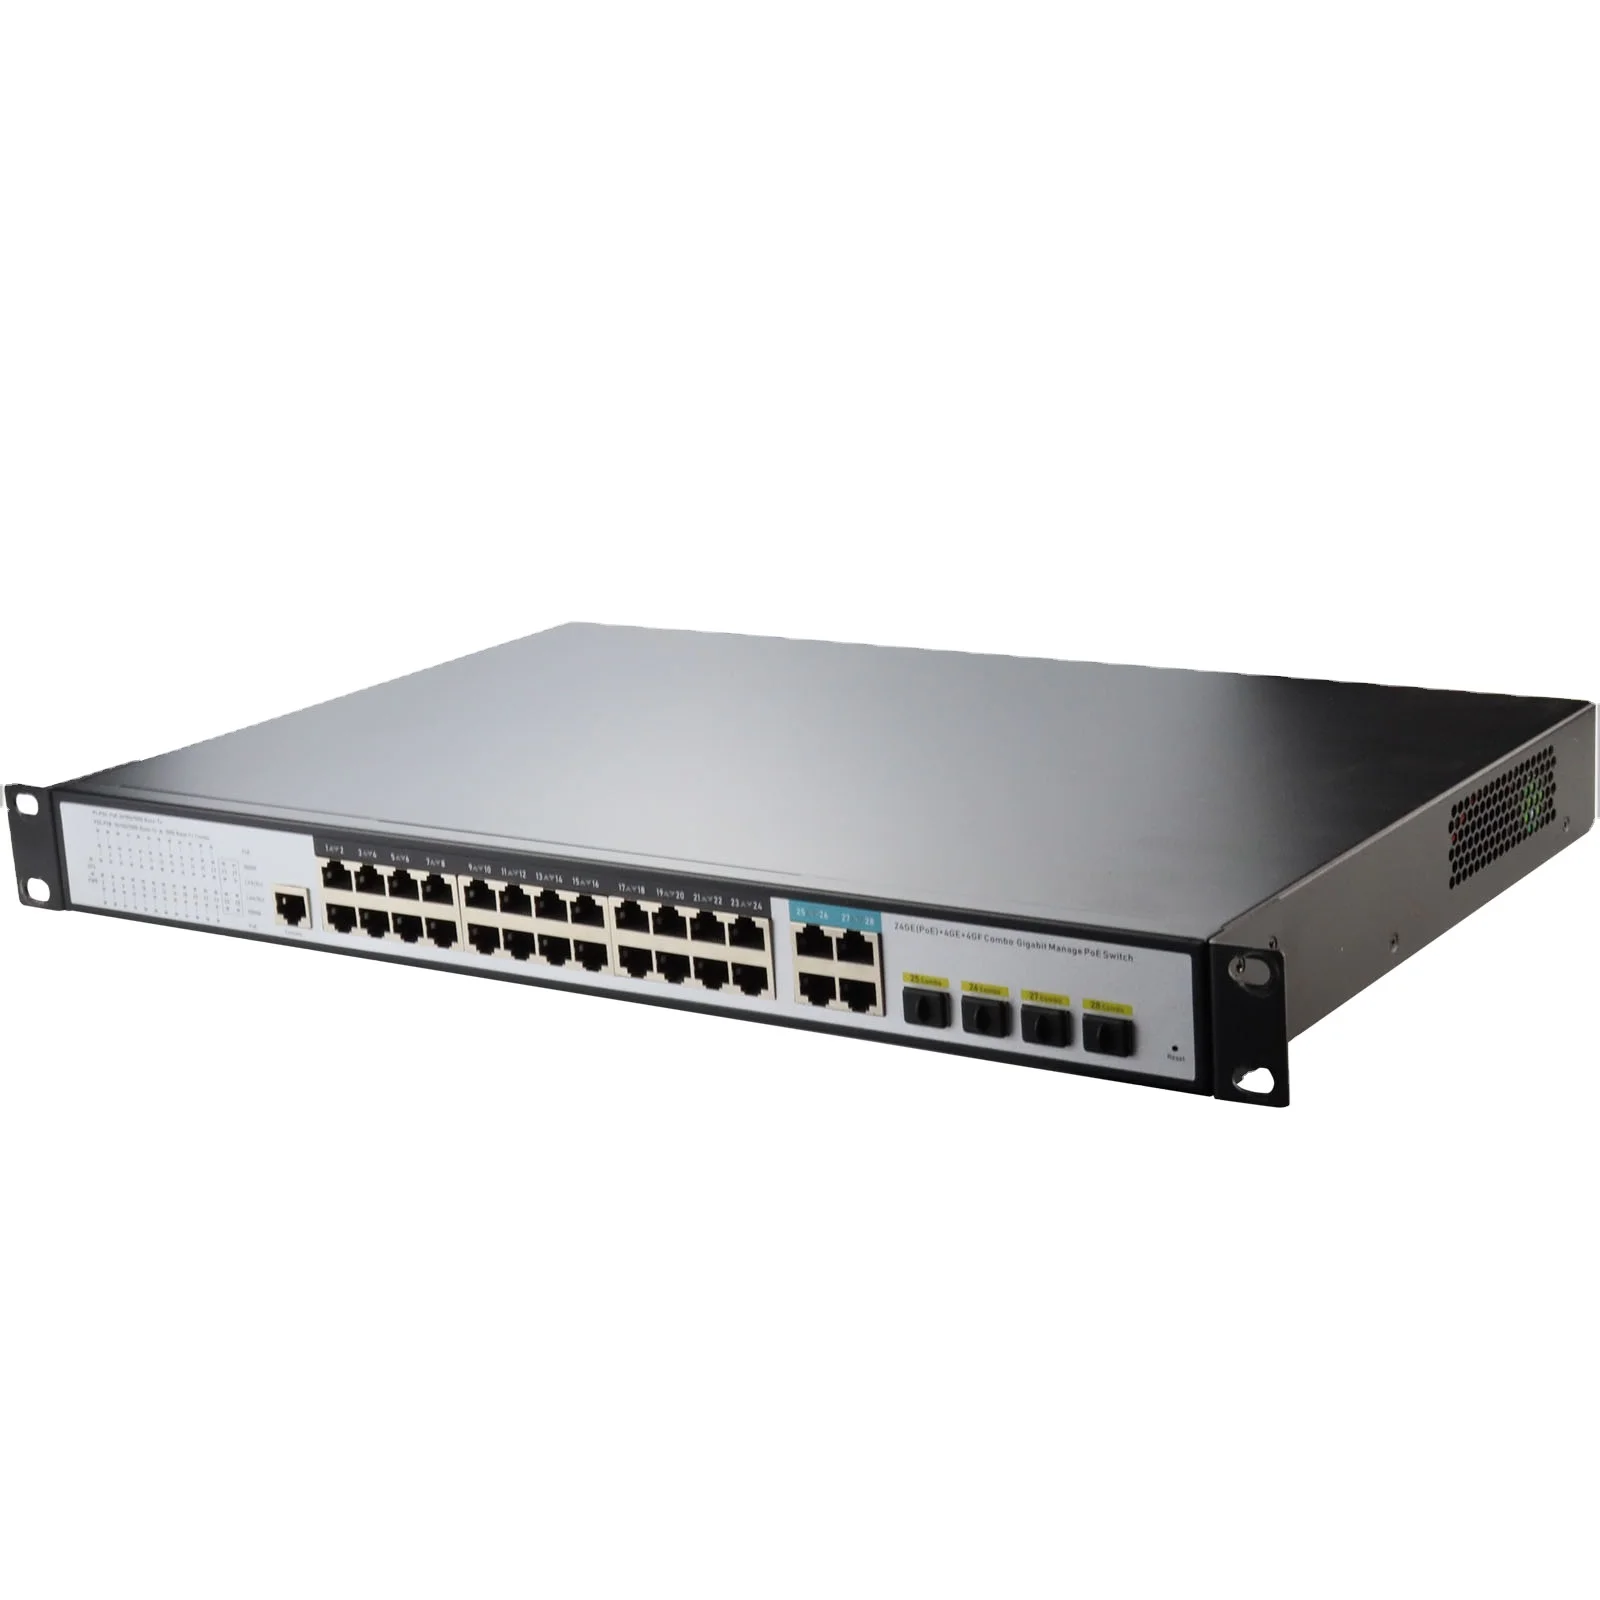 

Commercial L2+ 24-Port 10 100 1000T 802.3at PoE To 4-Port Gigabit TP/SFP Combo Managed Switch